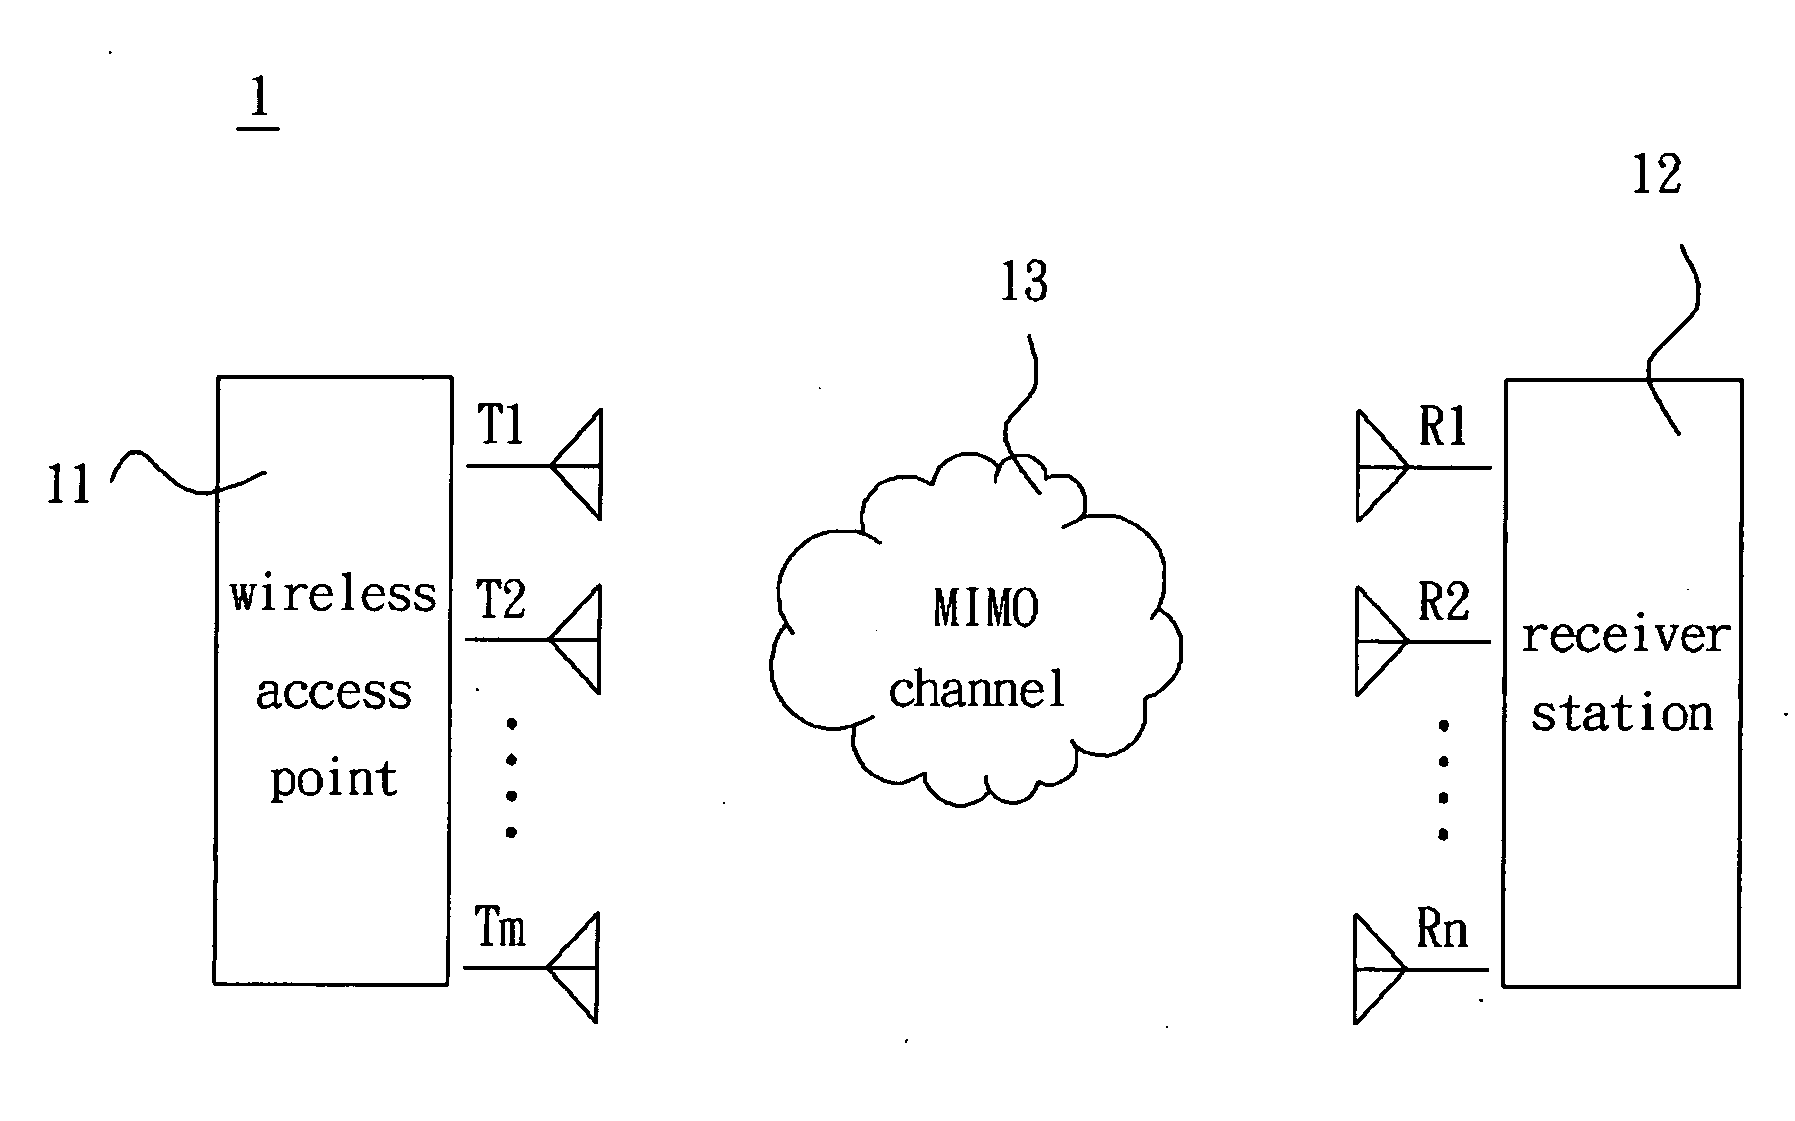 Channel emulating device